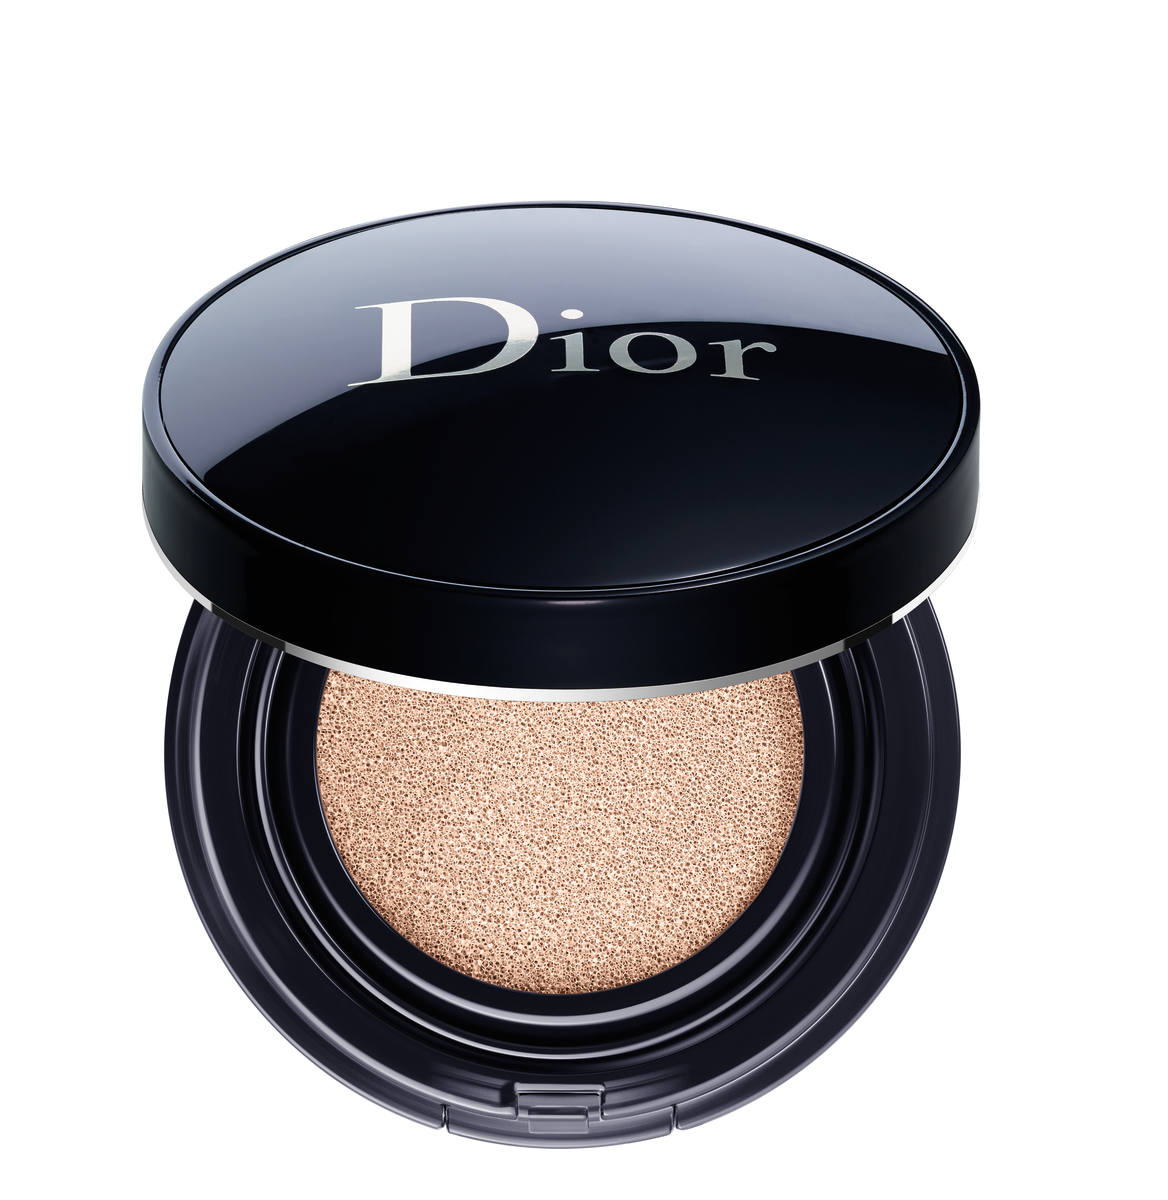 Dior forever perfect cushion